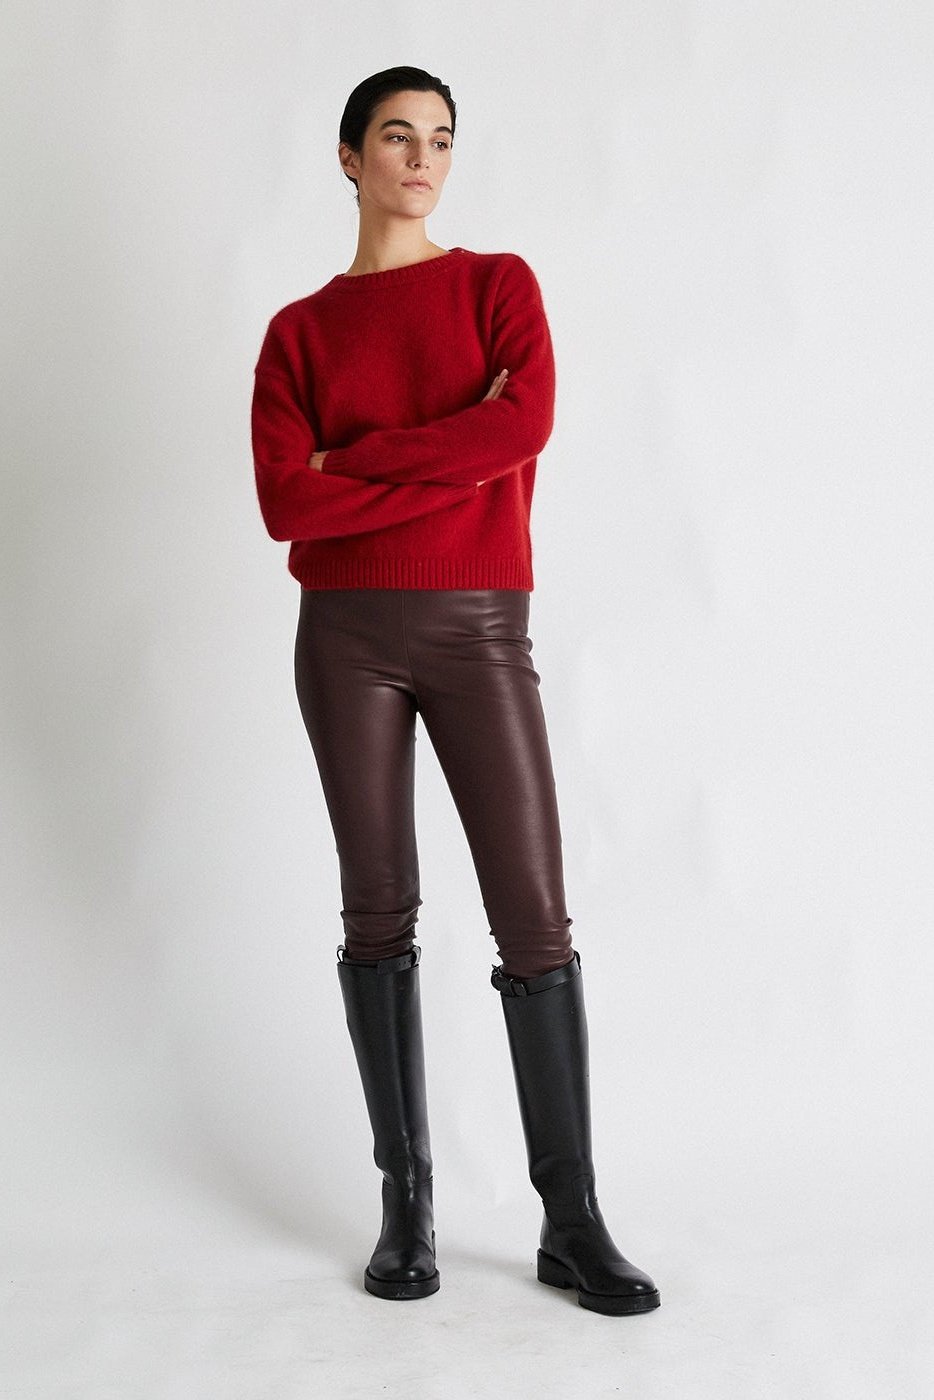 +Beryll Holly Cashmere Sweater | Cherry Red - +Beryll Holly Cashmere Sweater | Cherry Red - +Beryll Worn By Good People